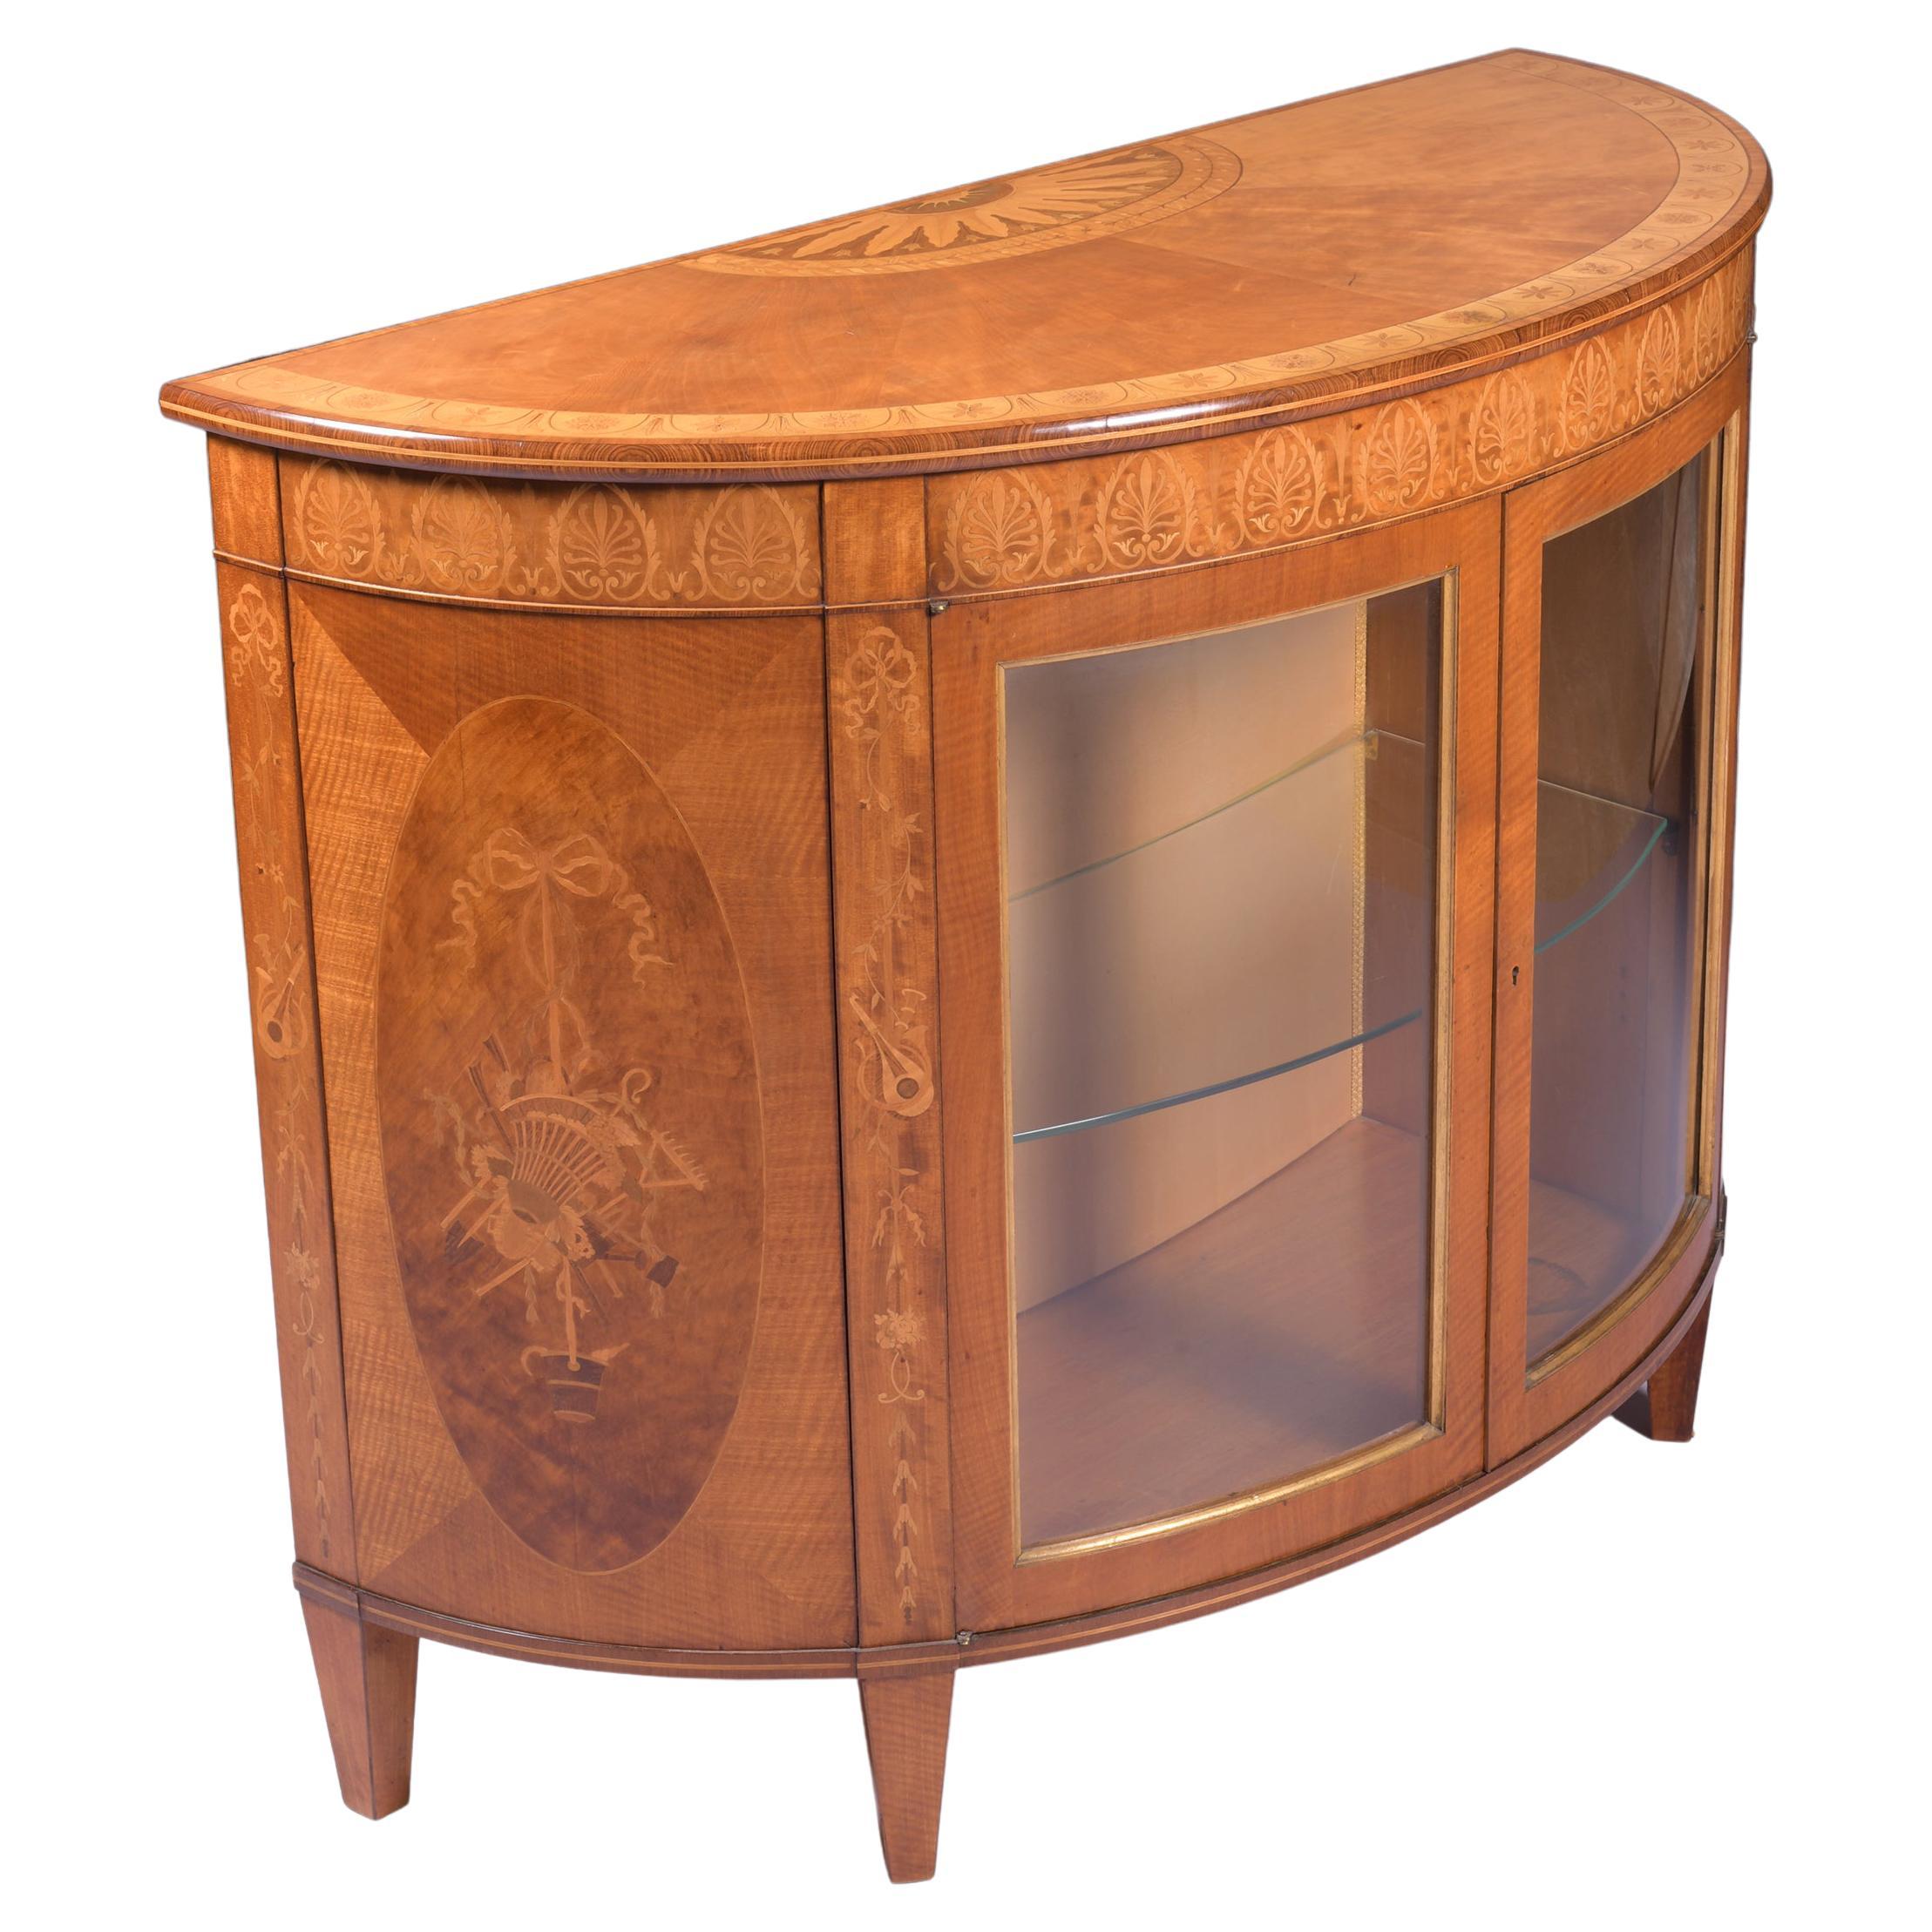 Late 19th Century Irish Satinwood Commode by James Hicks of Dublin For Sale